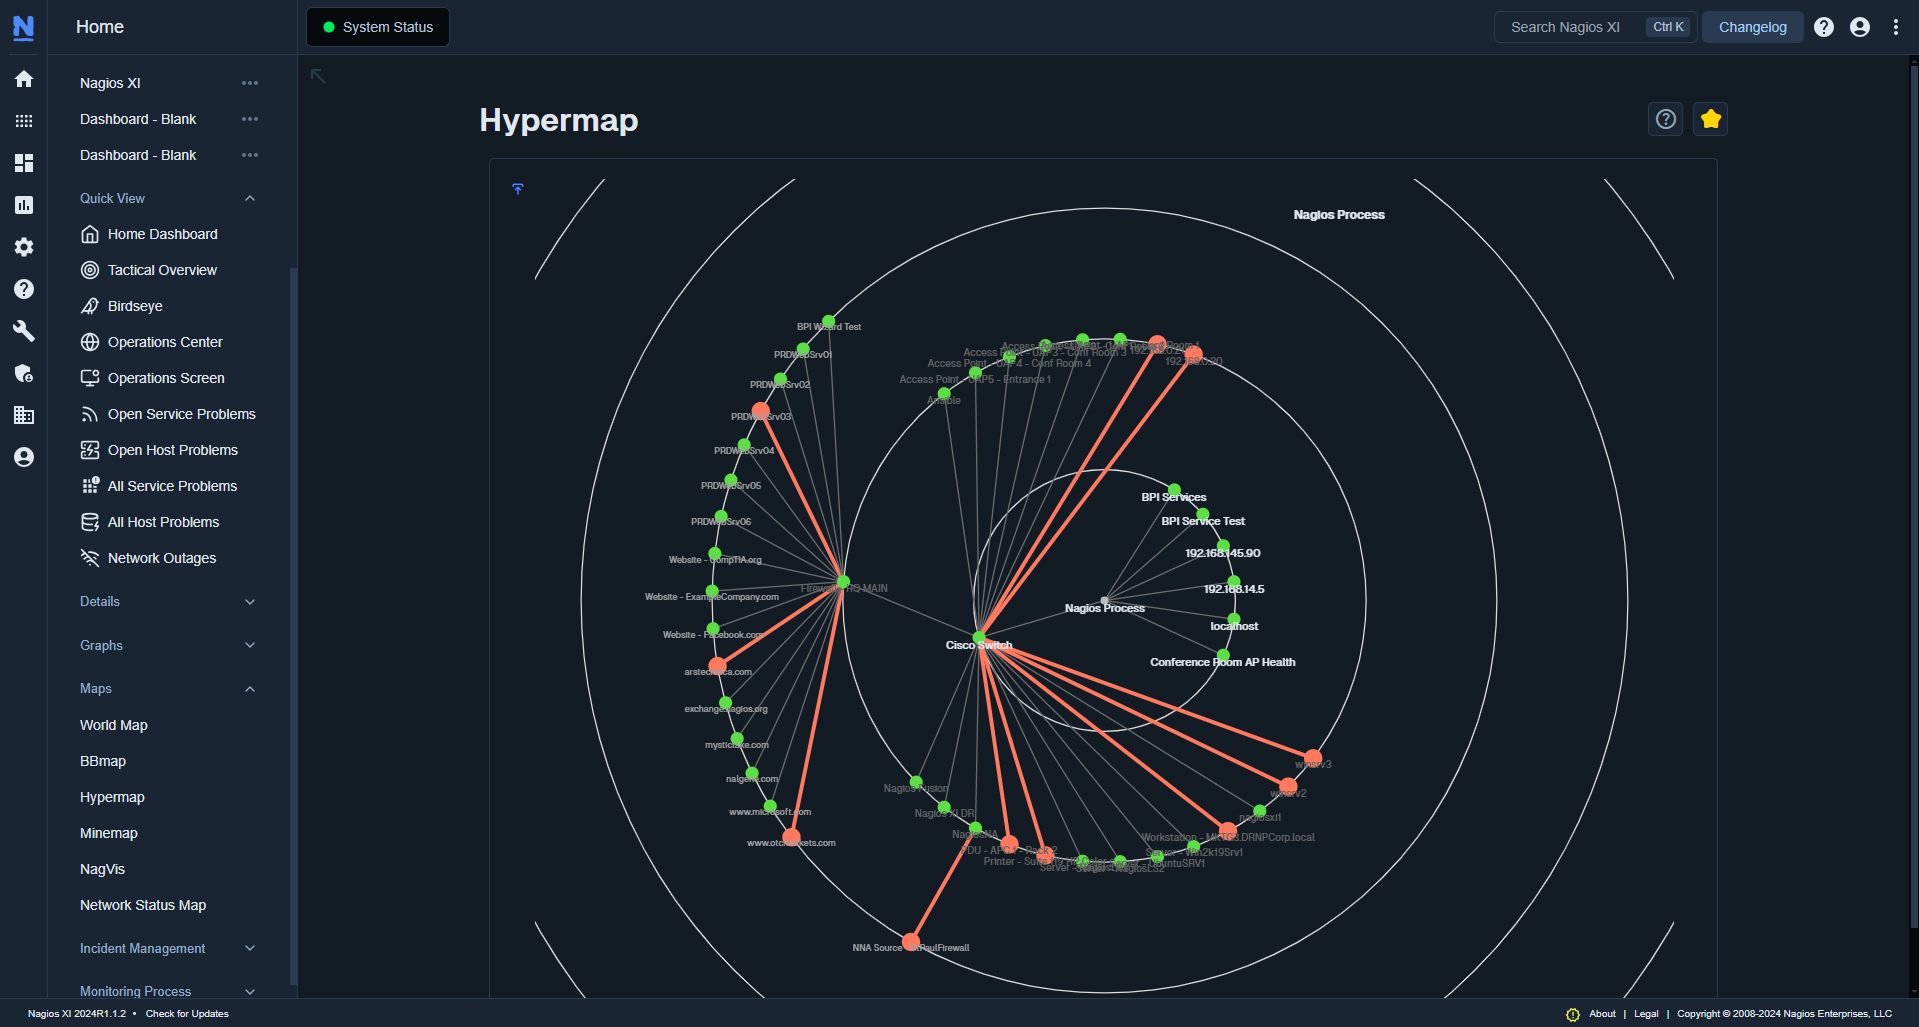 The Hypermap in Nagios XI. This map shows the parent-child host relationships in your environment. Get an at-a-glance view of where issues are occuring in your deployment. Shown in the Neptune theme.